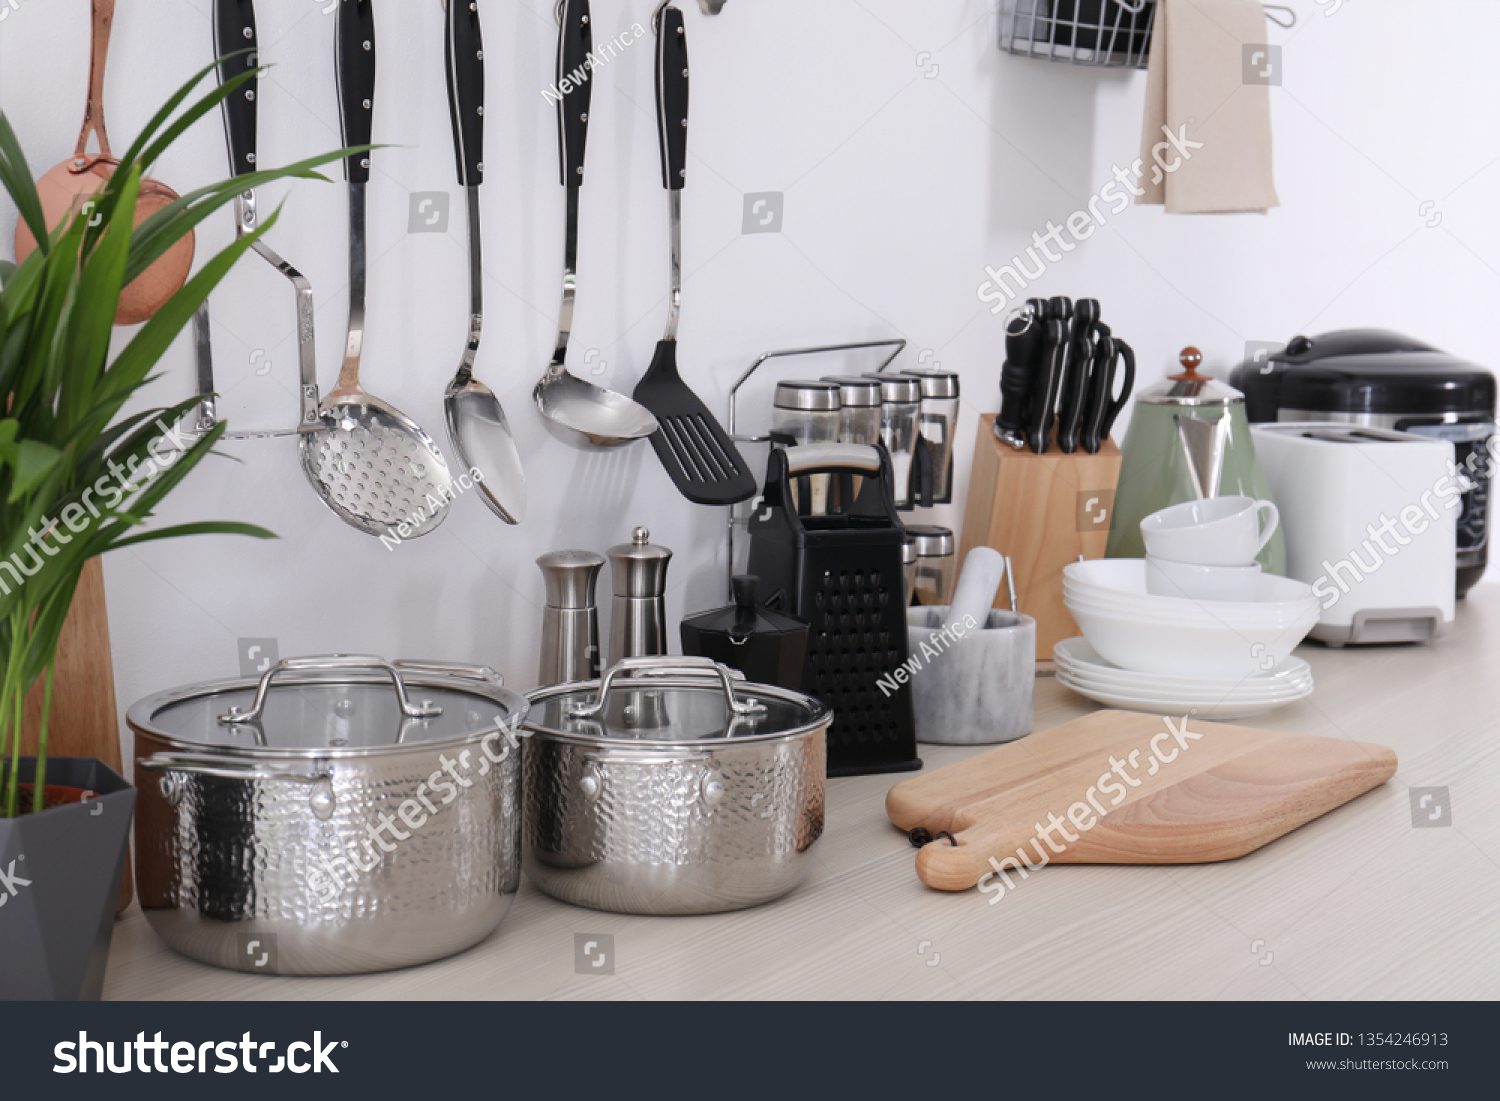 Set of clean cookware, dishes, utensils and appliances on table at white wall #1354246913